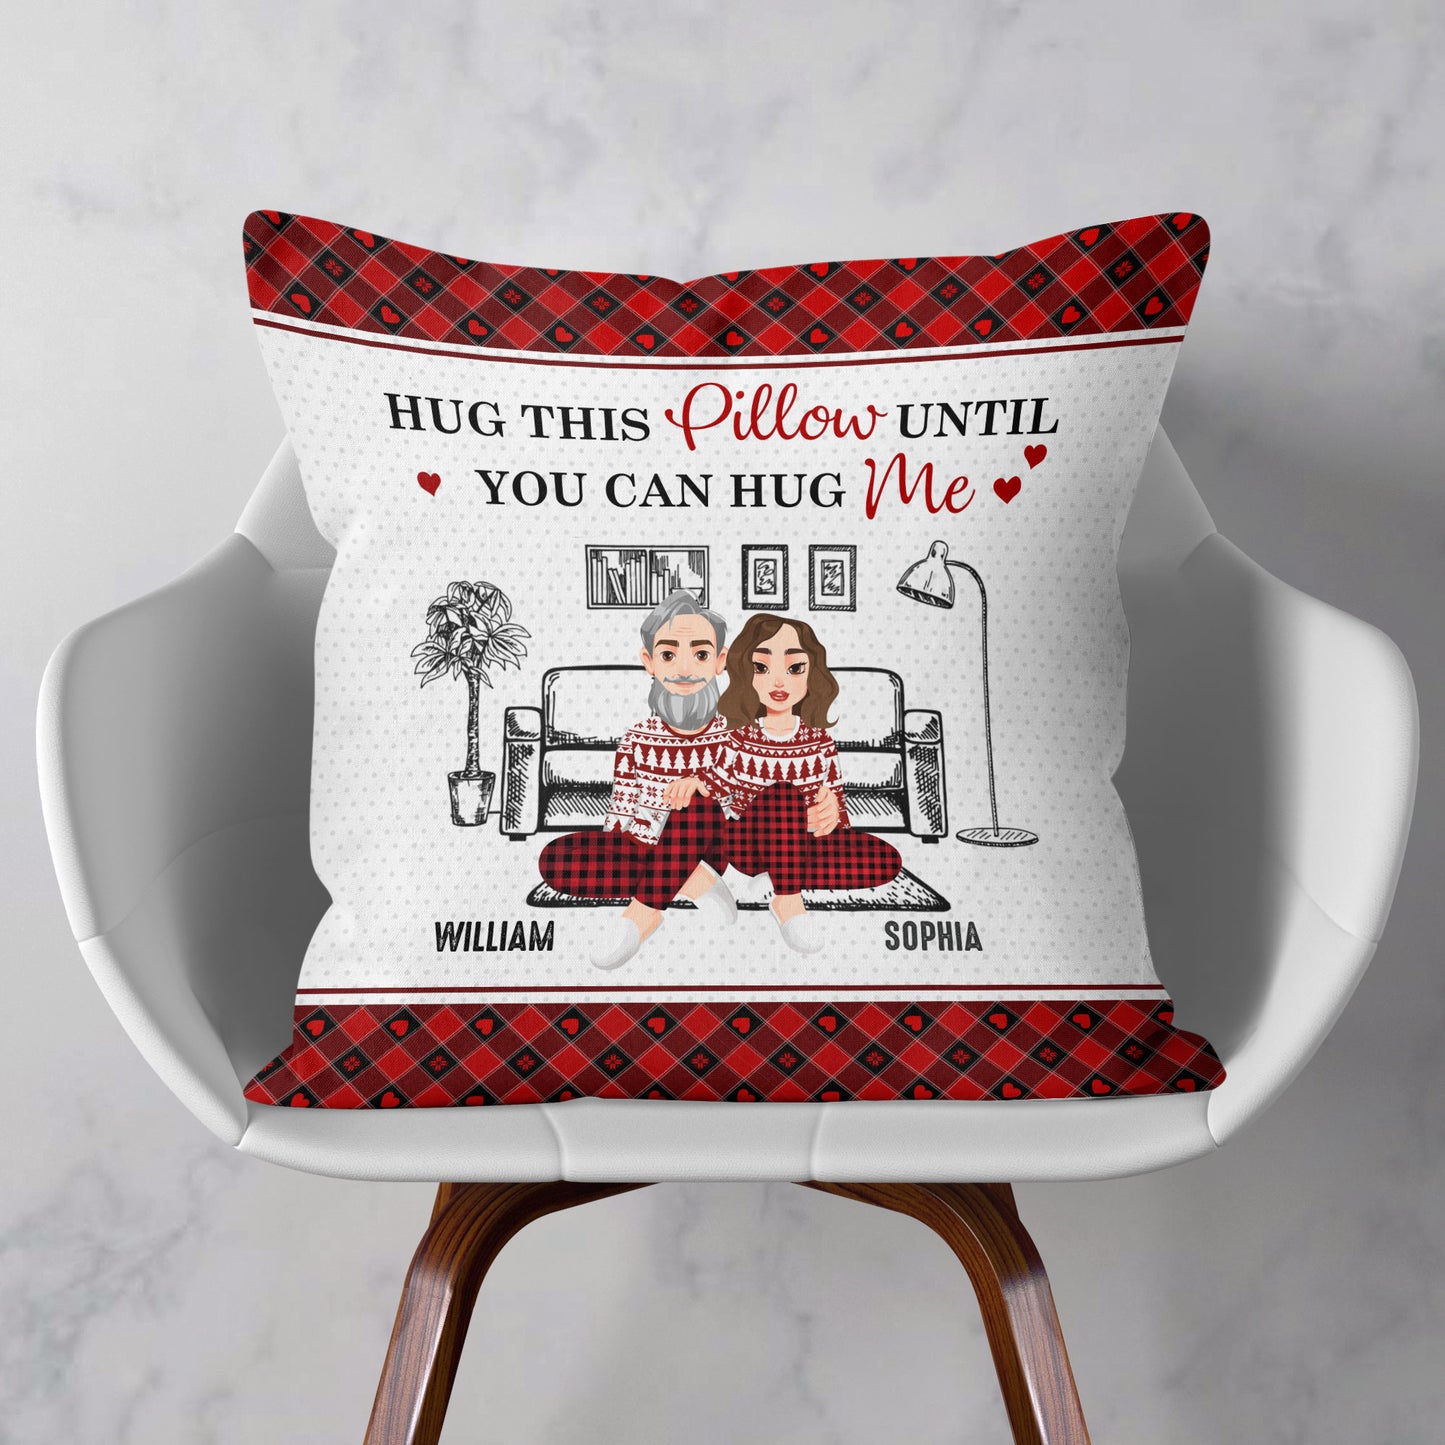 Hug This Pillow Until You Can Hug Me - Personalized Pillow